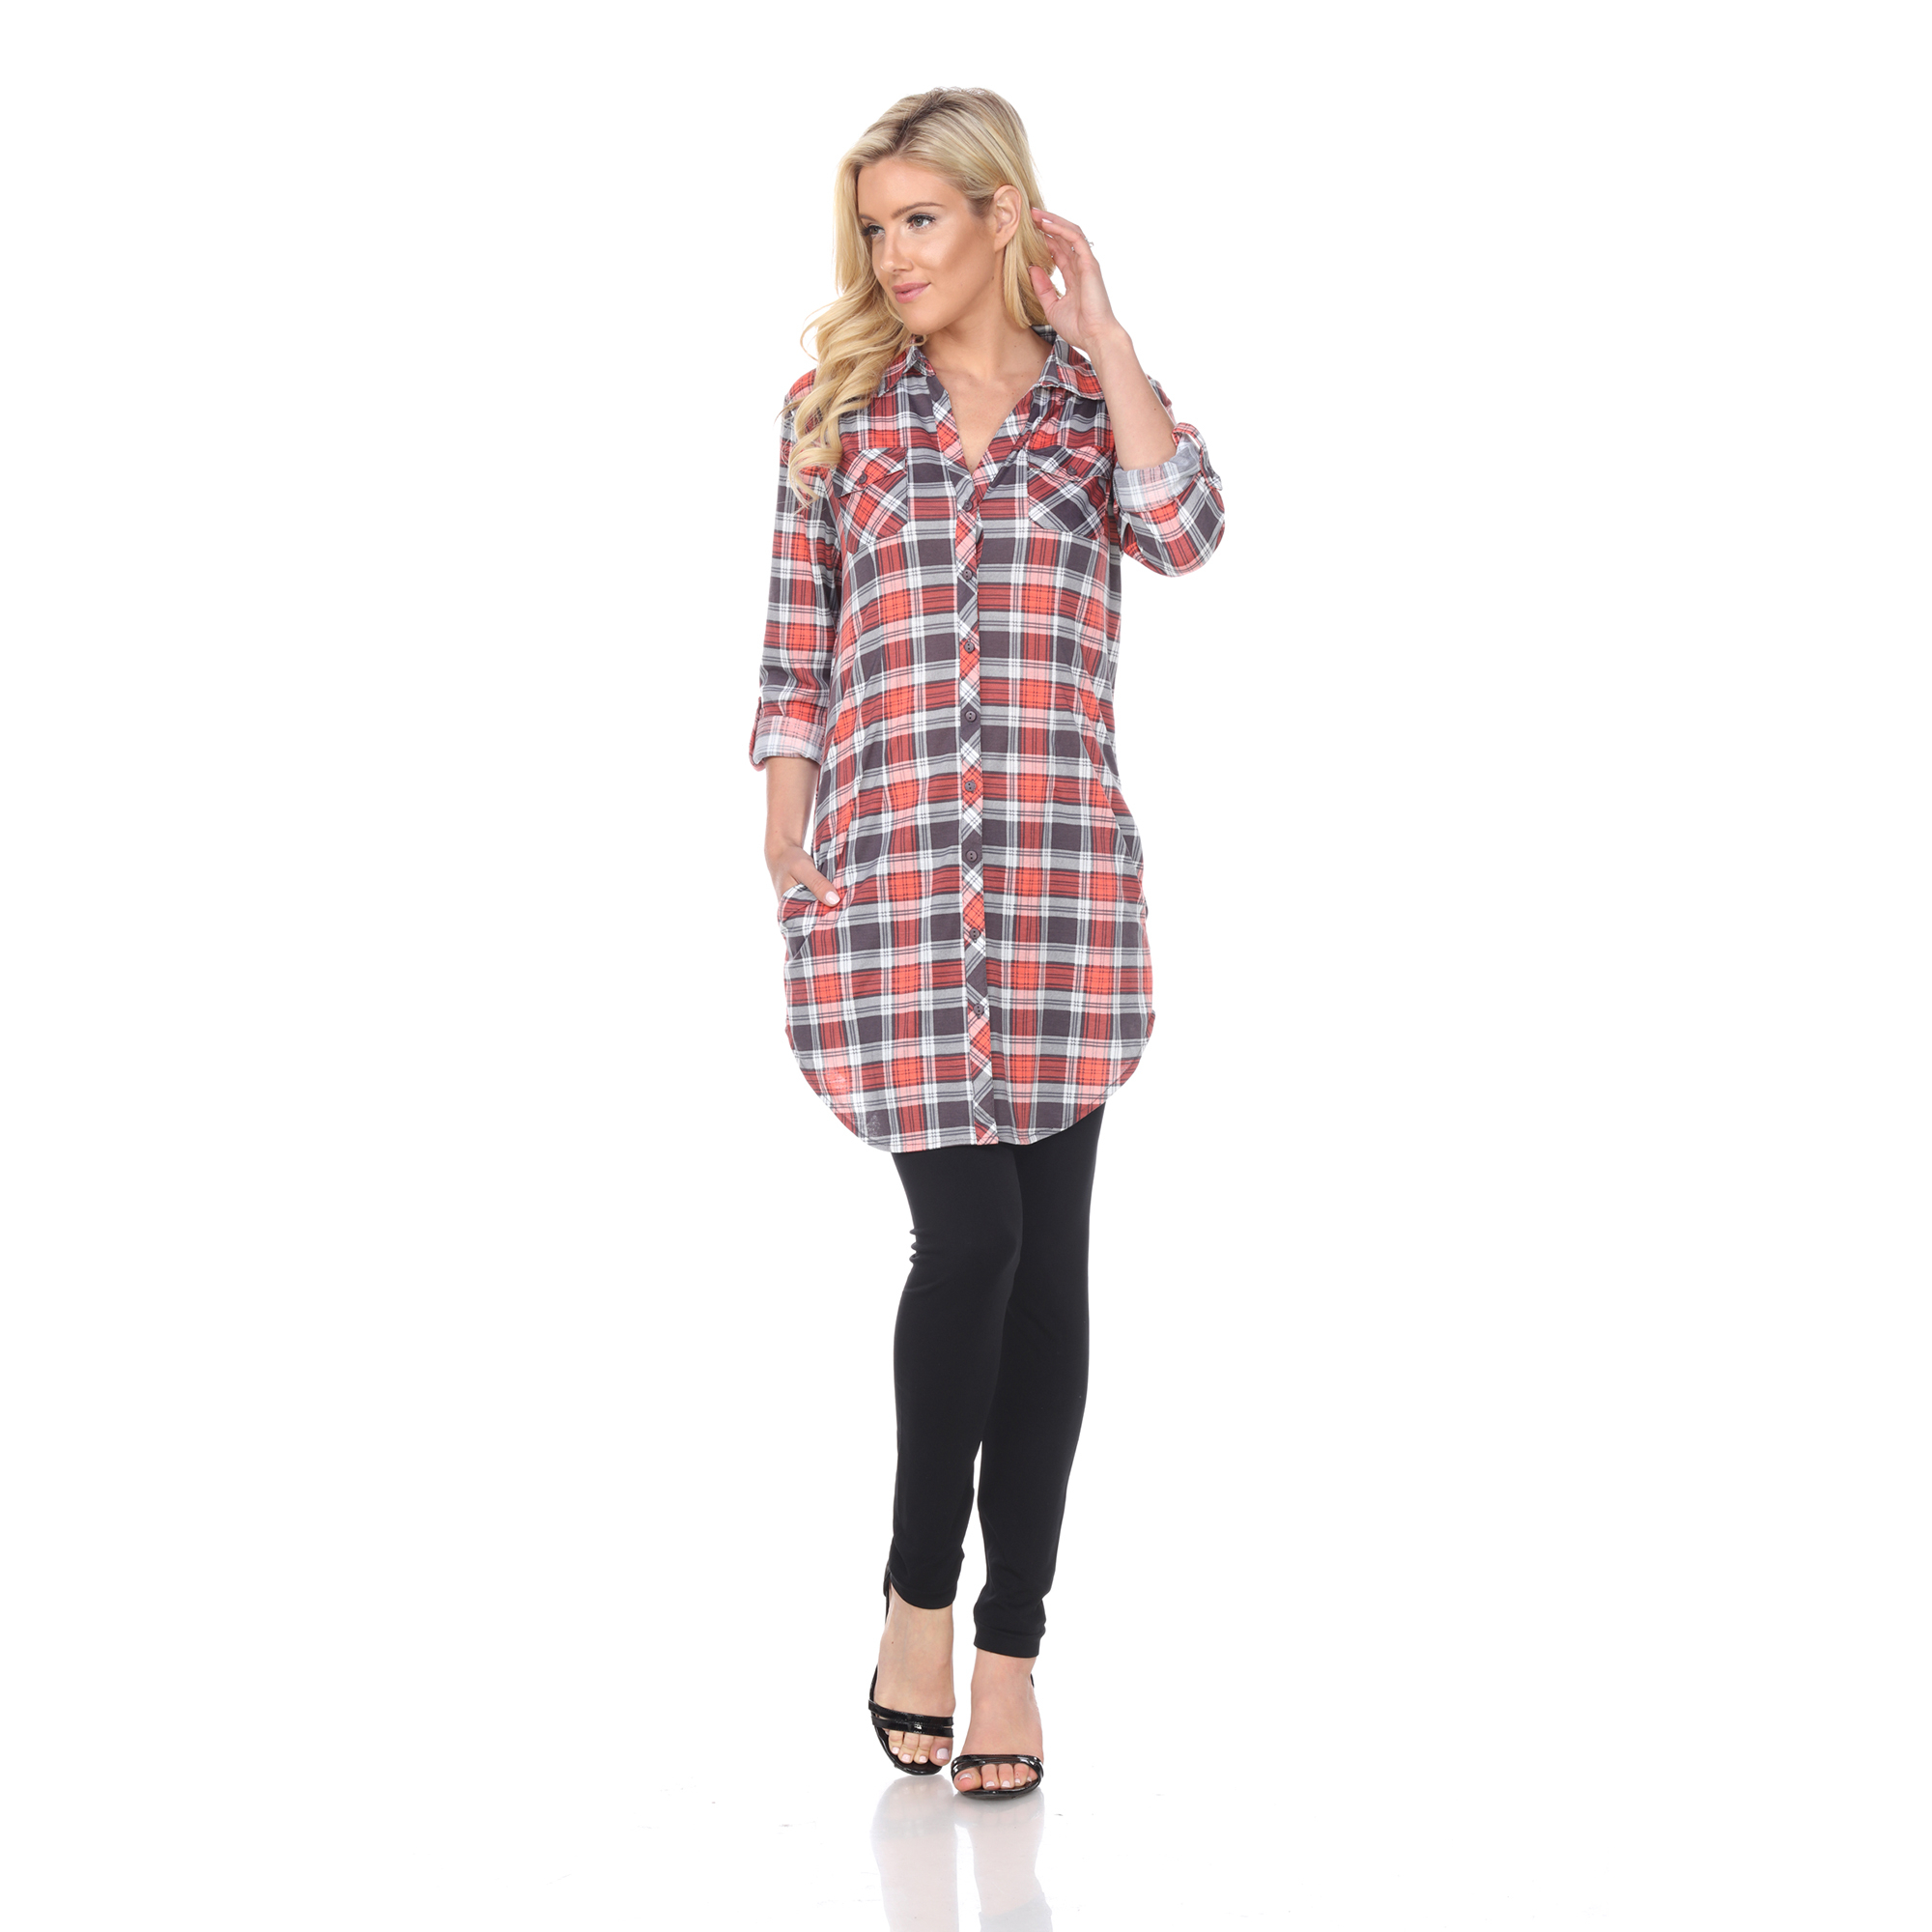 White Mark Women's Stretchy Plaid Flannel Tunic Top - Grey/Coral, Small